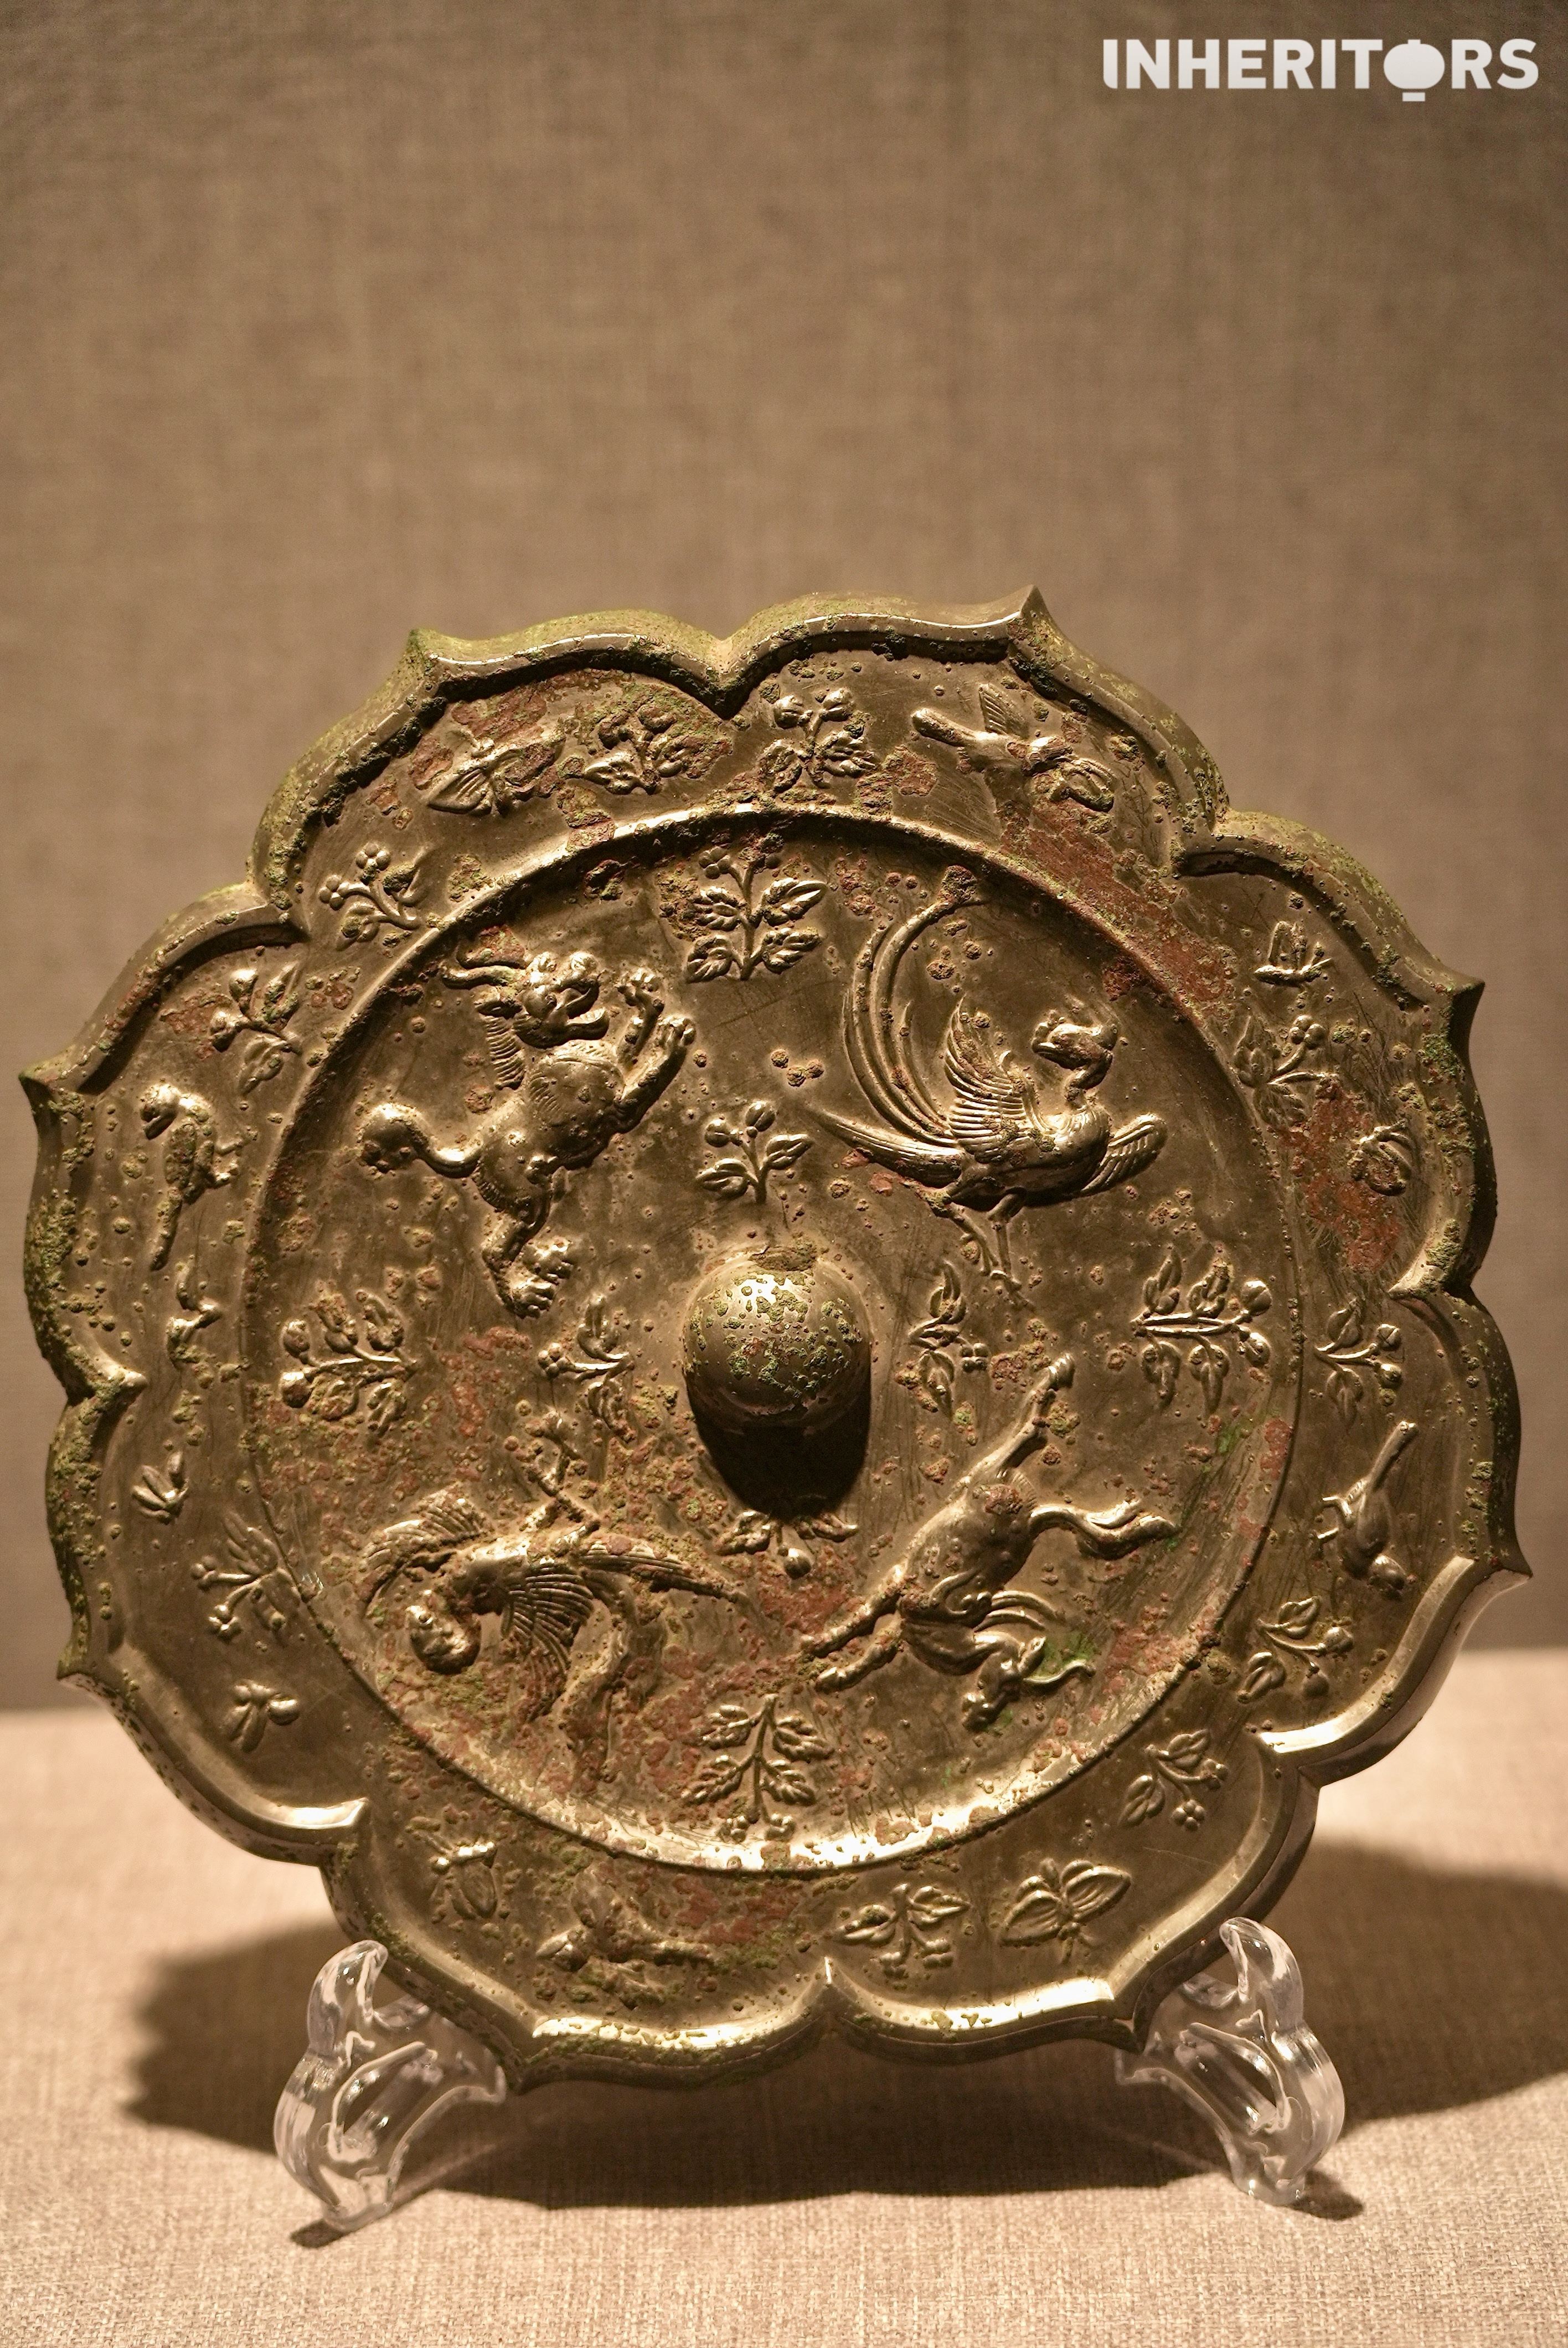 An ancient hand mirror is displayed in Luoyang, Henan Province. /CGTN